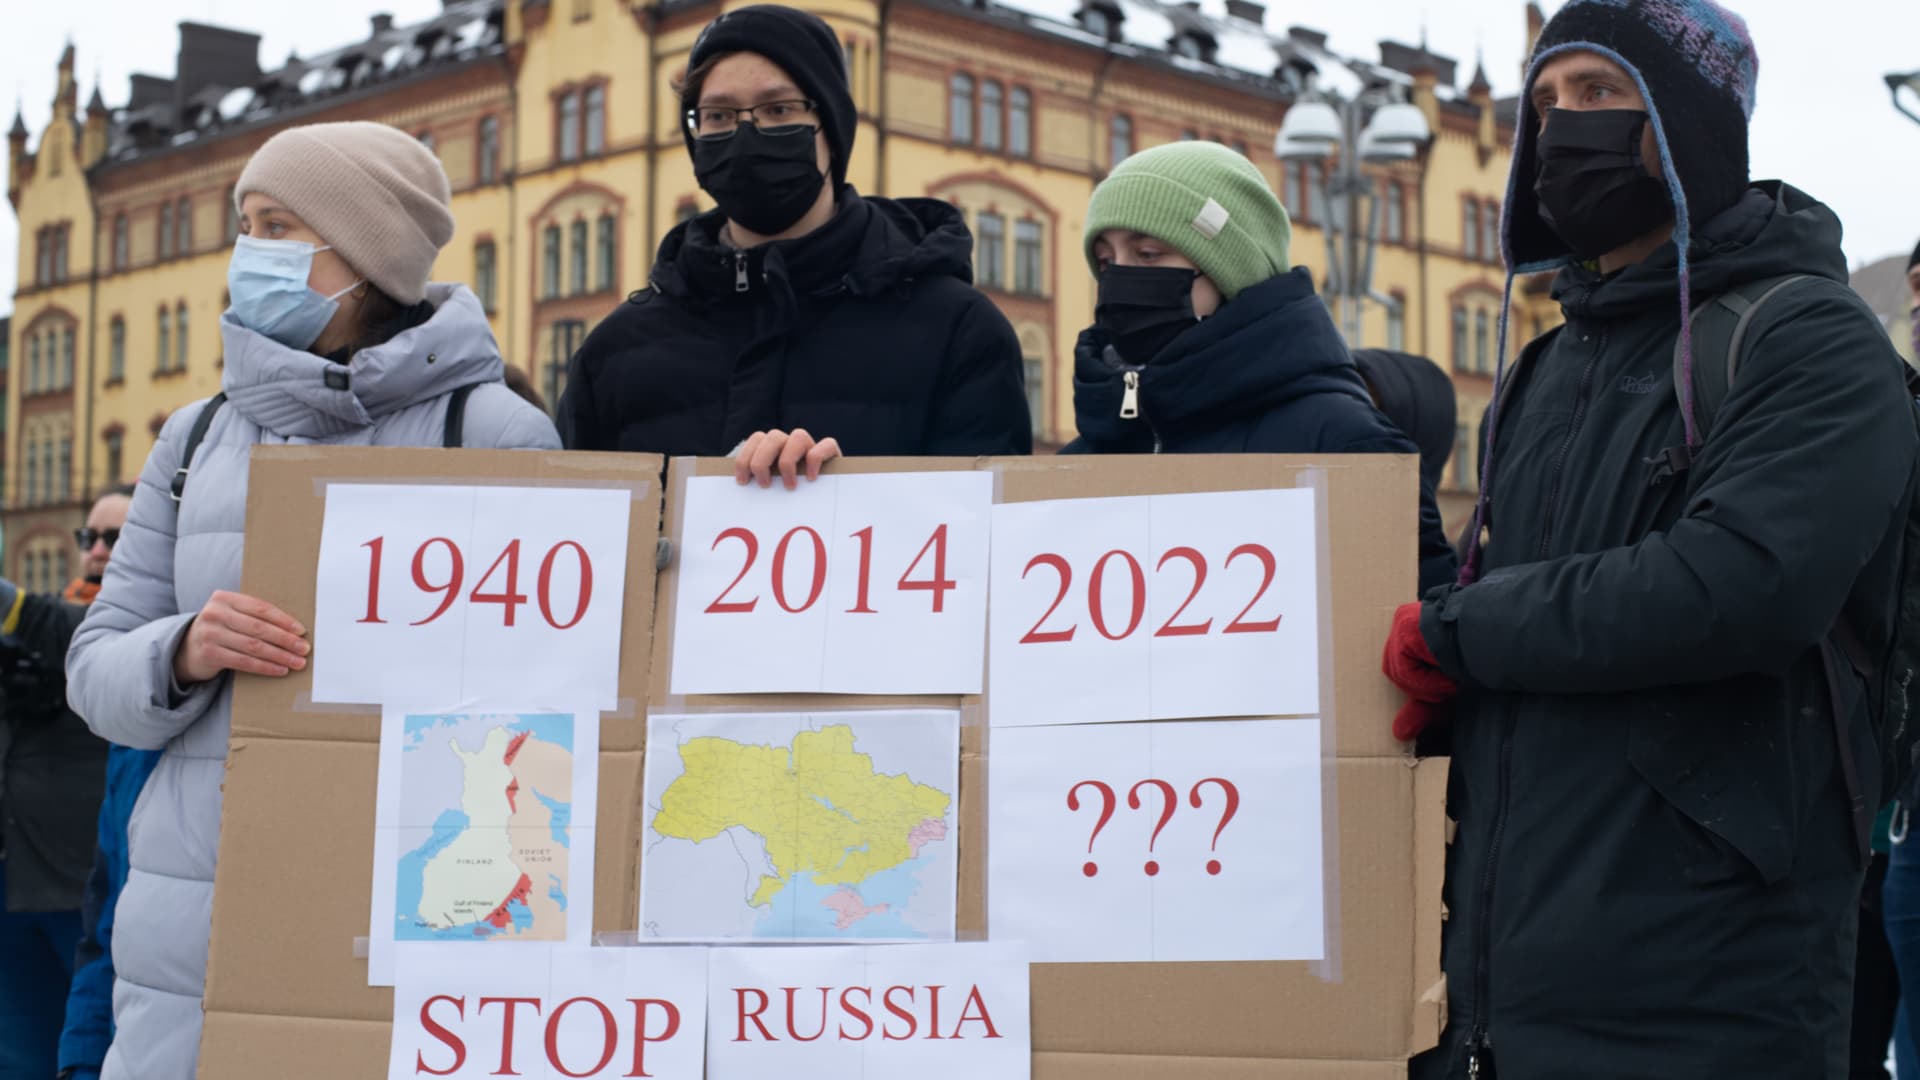 Finnish people and Ukrainians living in Finland protest against the Russian invasion in Ukraine and in solidarity with the Ukrainian people, in the centre of Tampere, Finland on Thursday, February 24th, 2022.